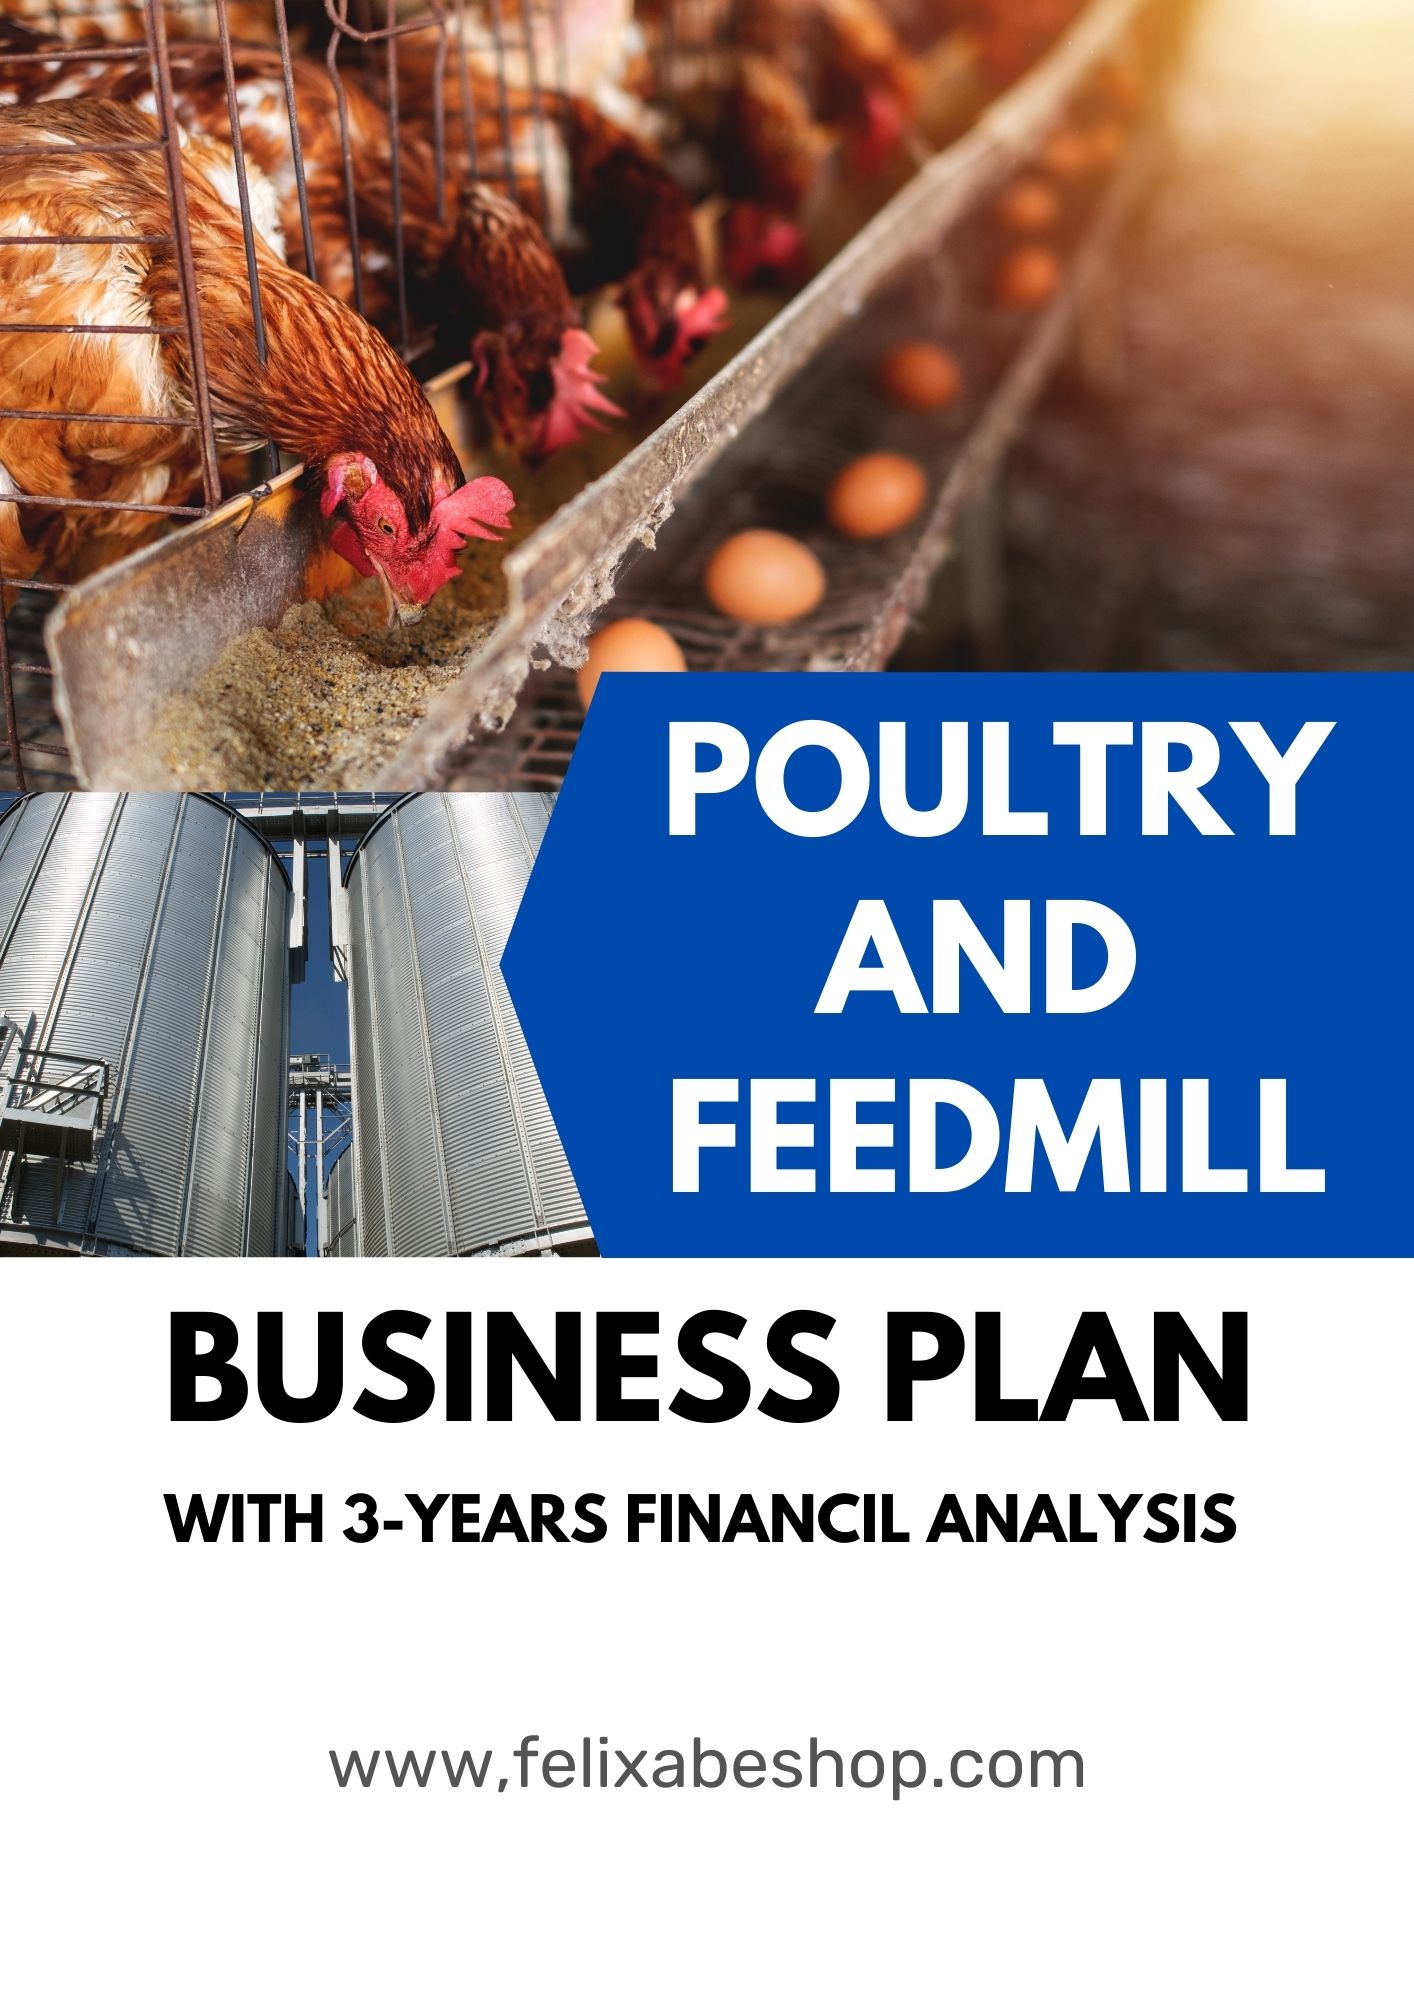 local poultry feed business plan pdf